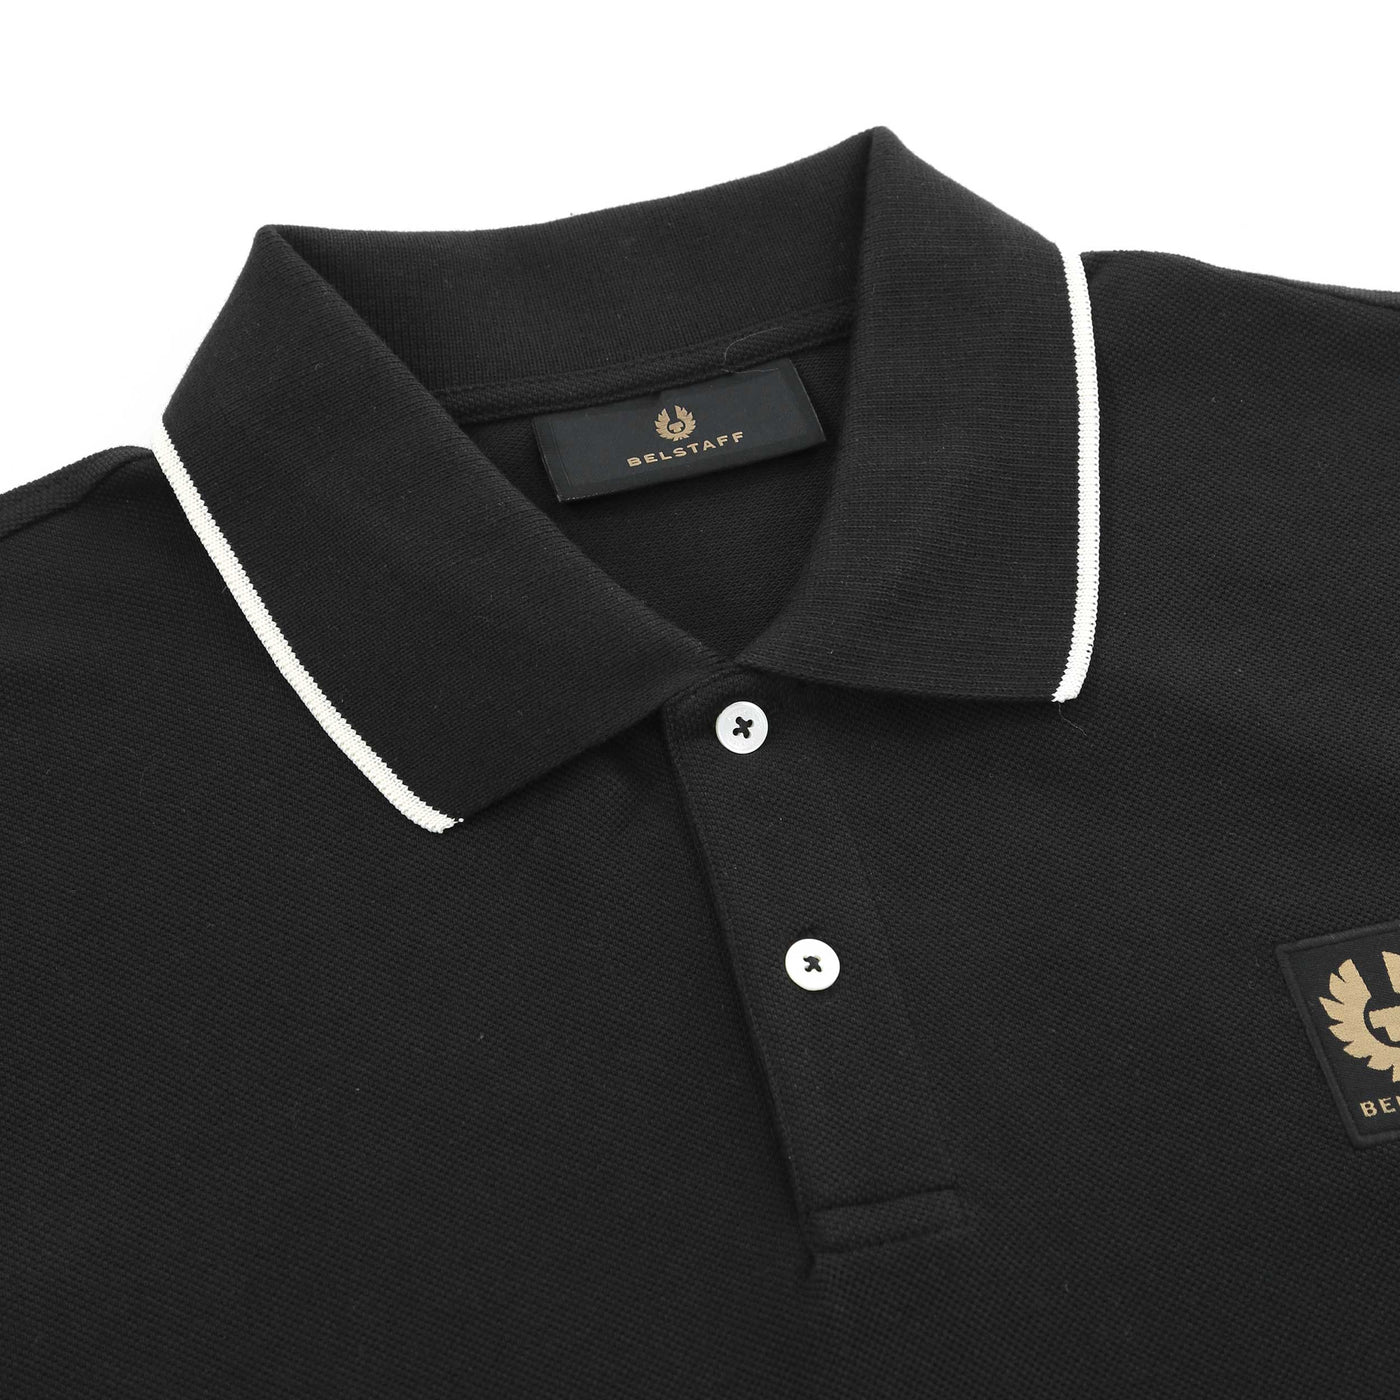 Belstaff Tipped Polo Shirt in Black Collar